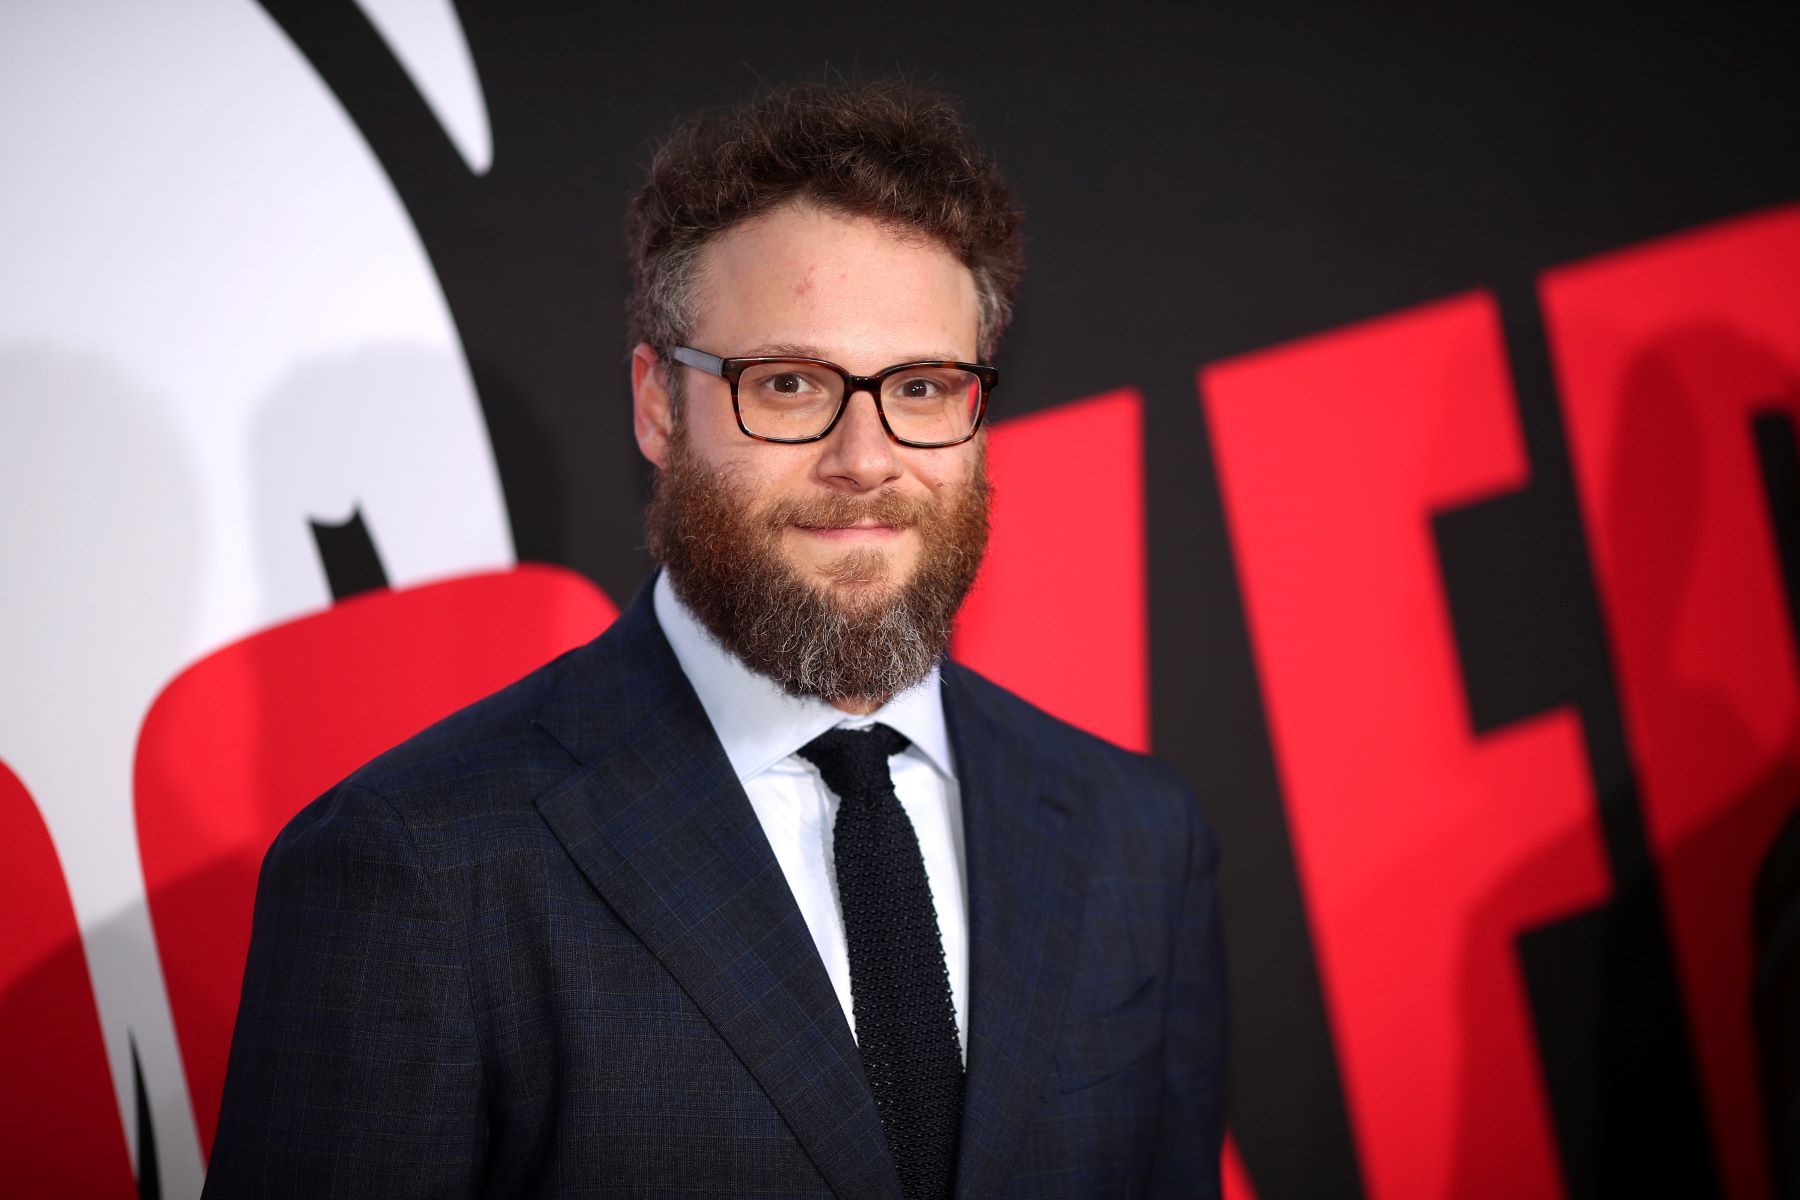 Seth Rogen Says He Was Fed 'A Huge Amount of Lies' About Israel His